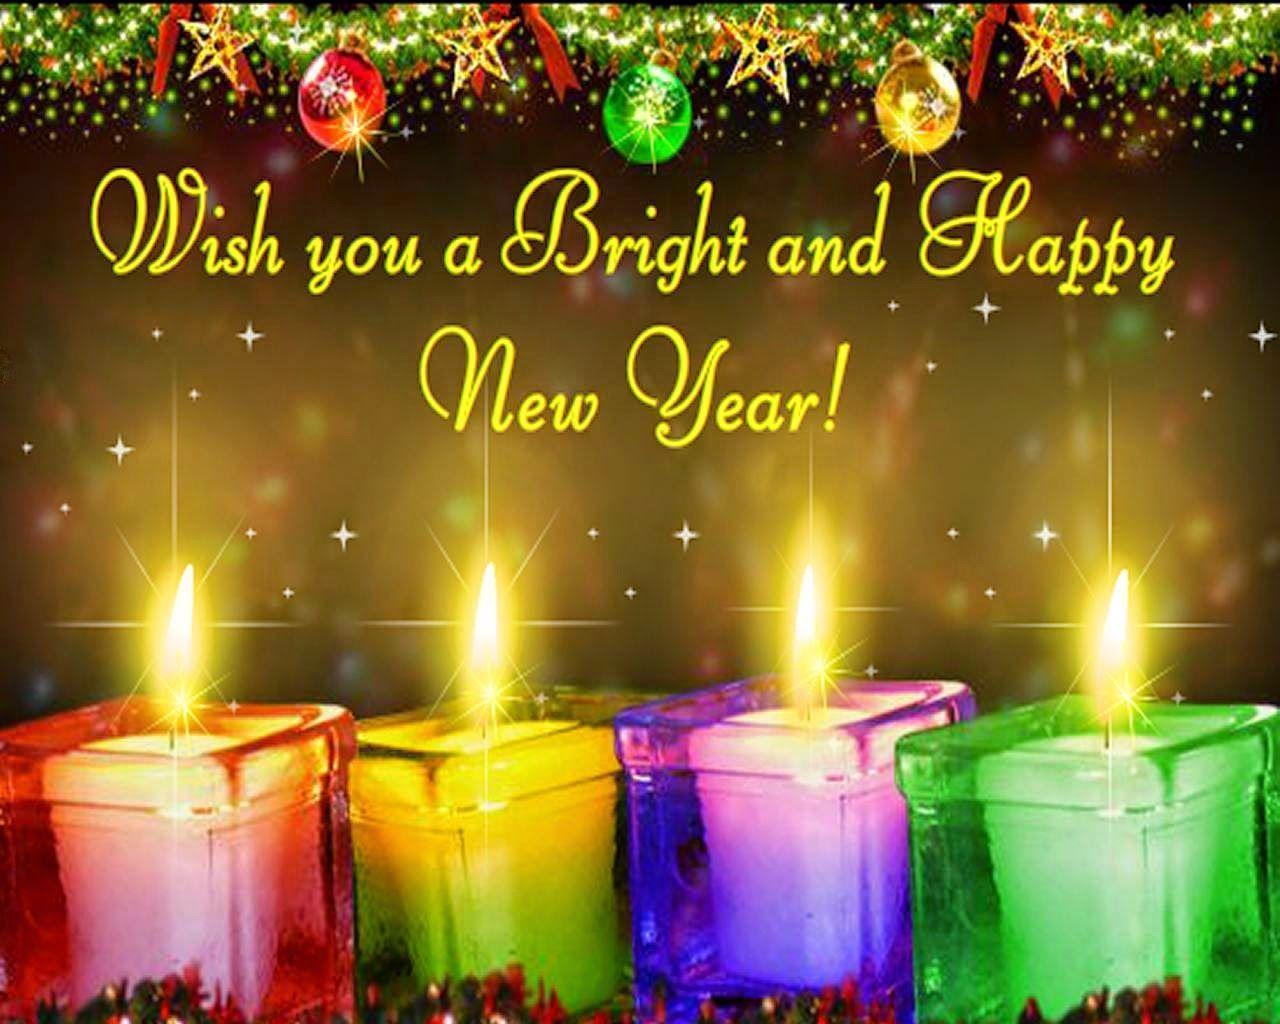 Happy New Year 2016: Image, Picture, HD Wallpaper, Greetings